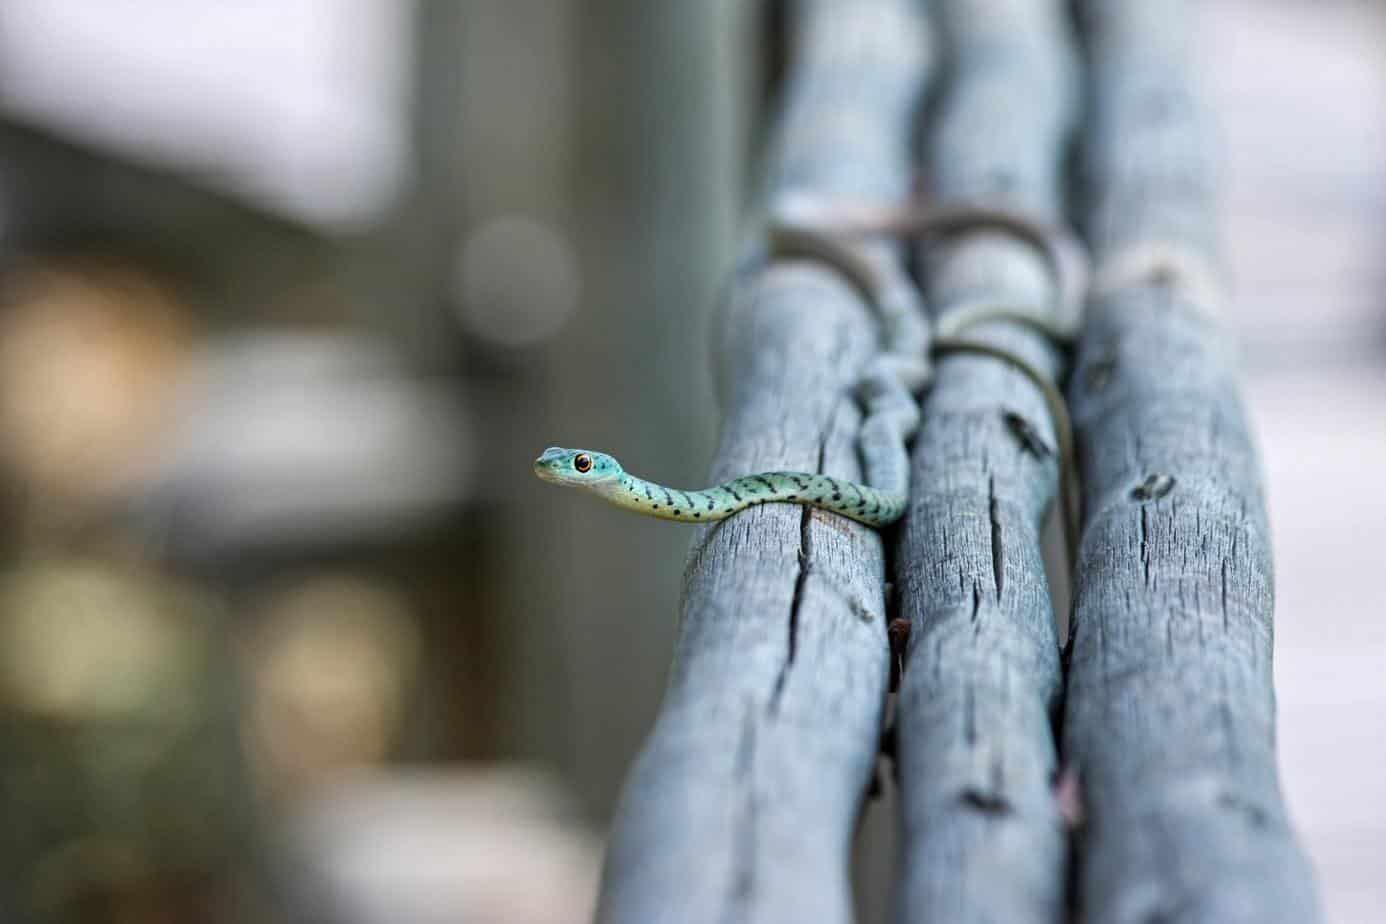 https://takeoutdoors.com/wp-content/uploads/2018/03/animal-branches-reptile-46500.jpg